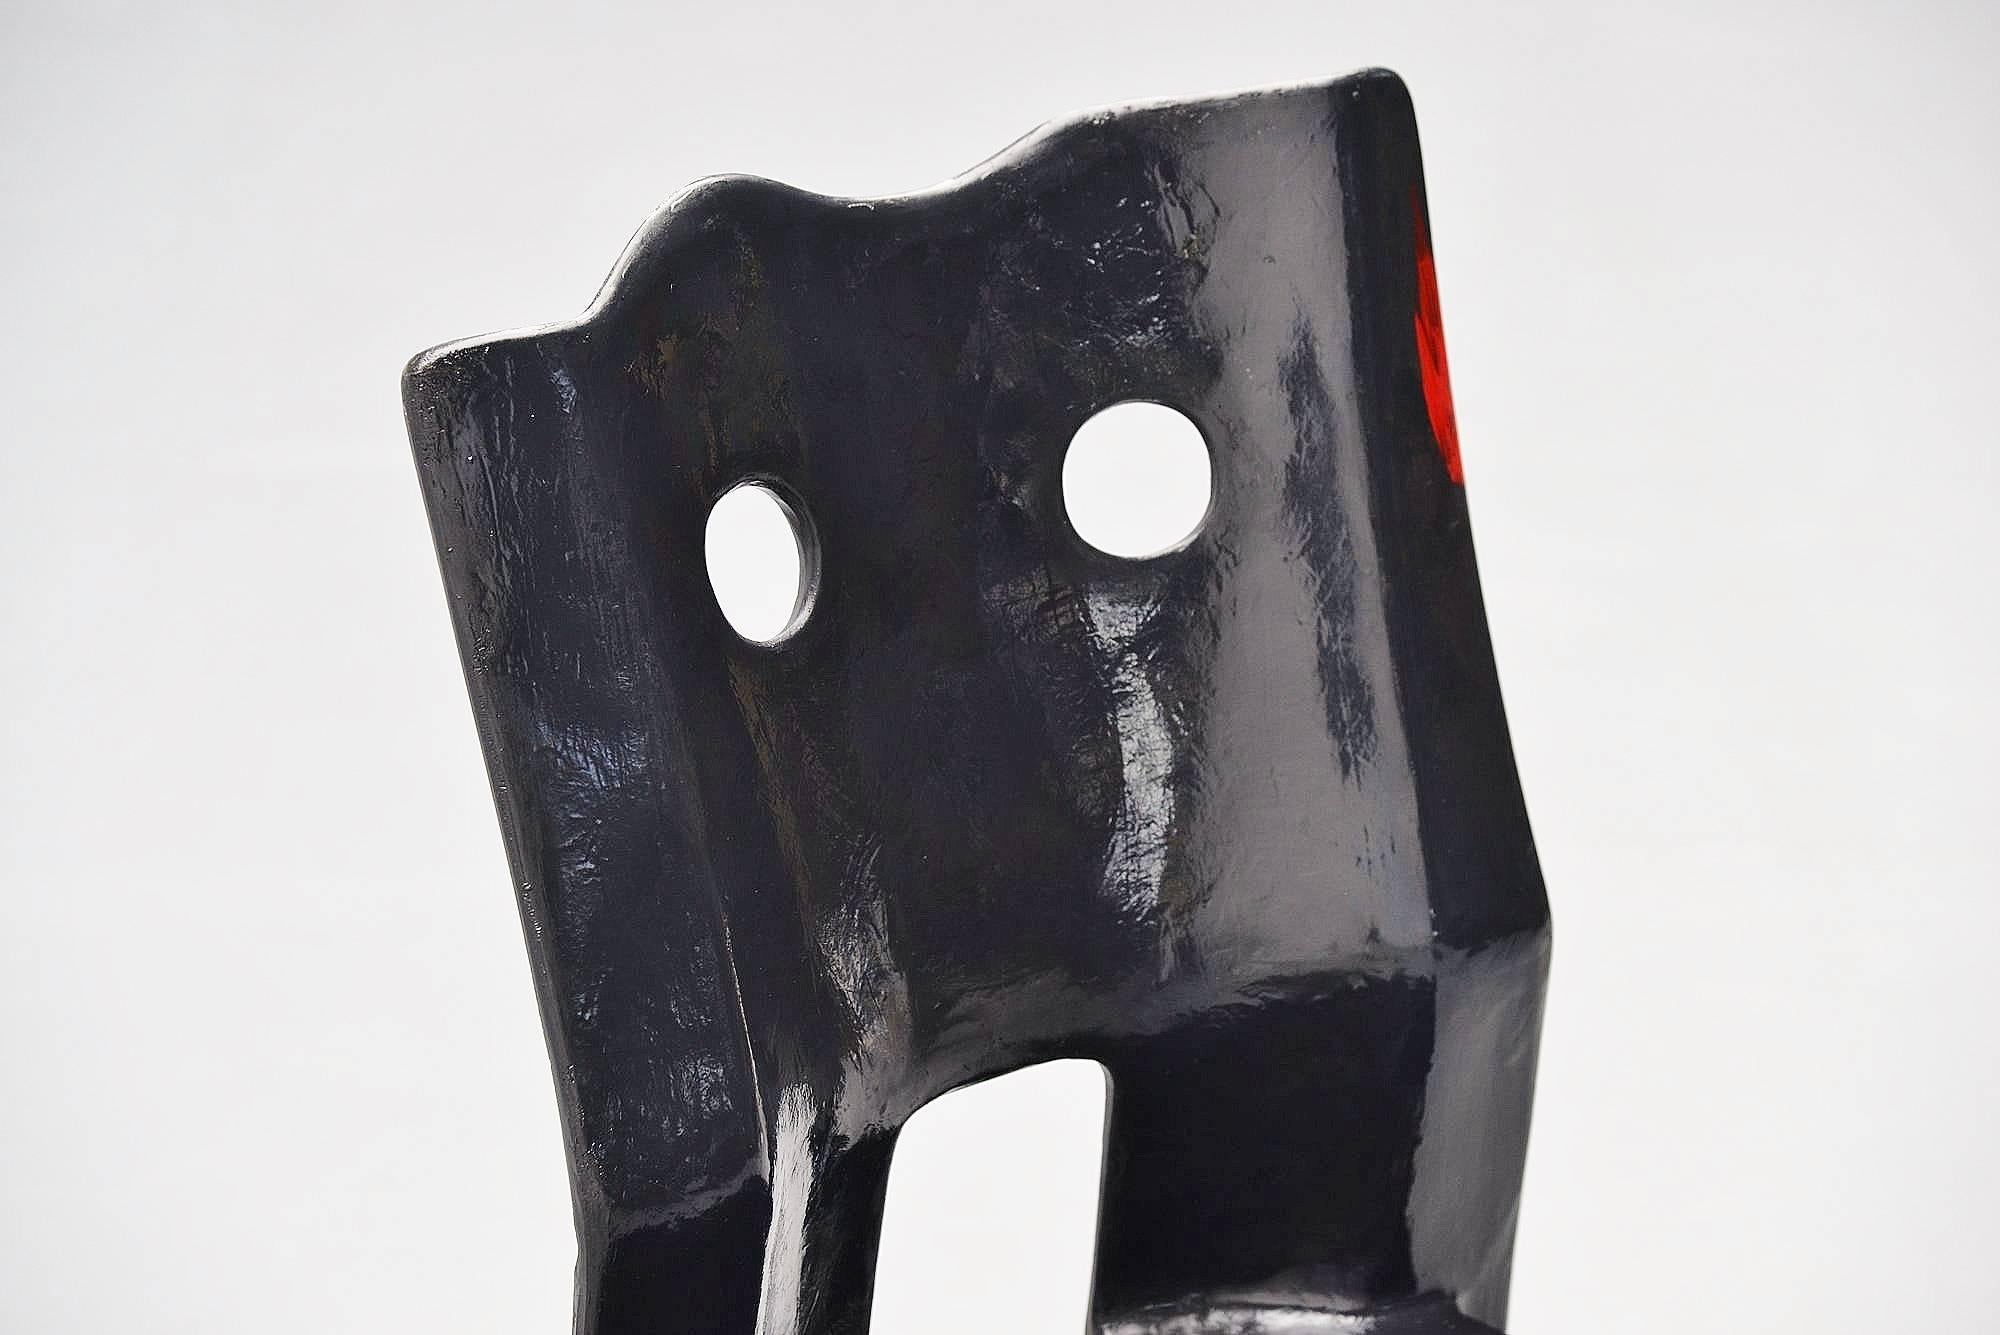 Rare collectors item chair designed by Gaetano Pesce for Vitra, Wheil am Rein Germany, 1984. This chair was called the Greene Street chair and was called after his studio in NY in the Greene Street. The chair was made of black painted resin, molded.